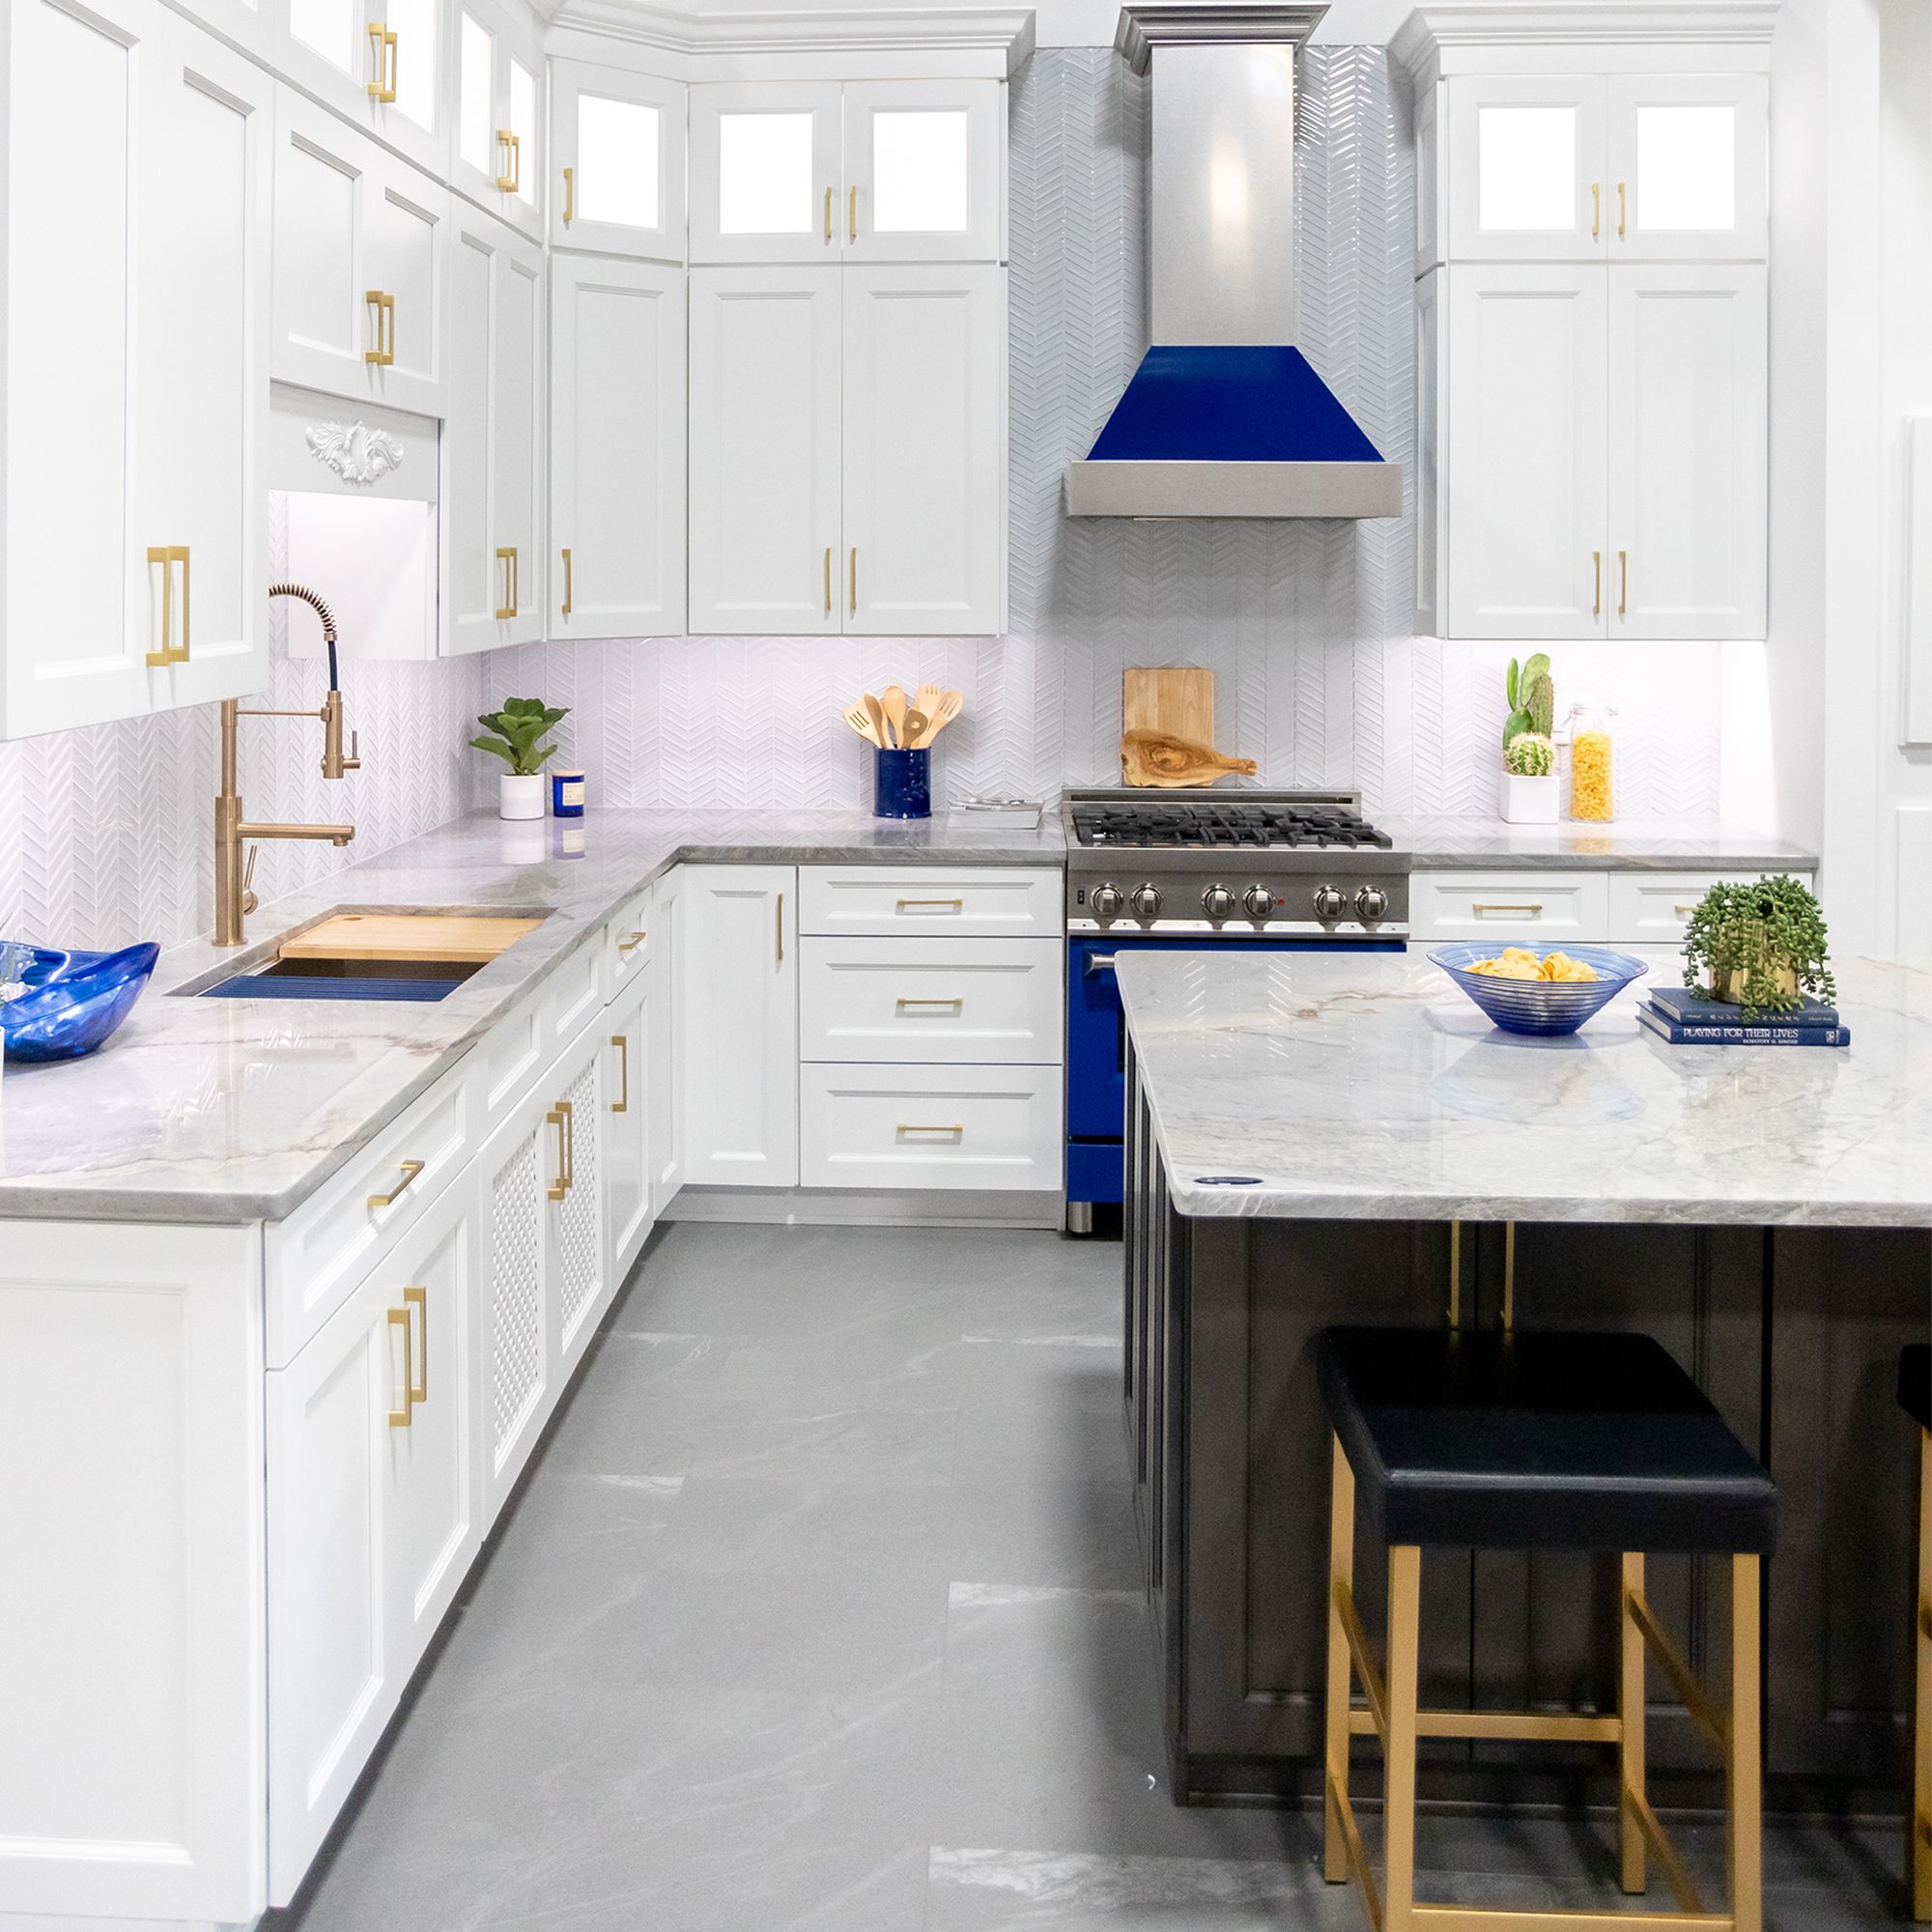 ZLINE Ducted Fingerprint Resistant Stainless Steel Range Hood with Blue Gloss Shell (8654BG) with matching blue gloss range in a white cottage-style kitchen from wide.